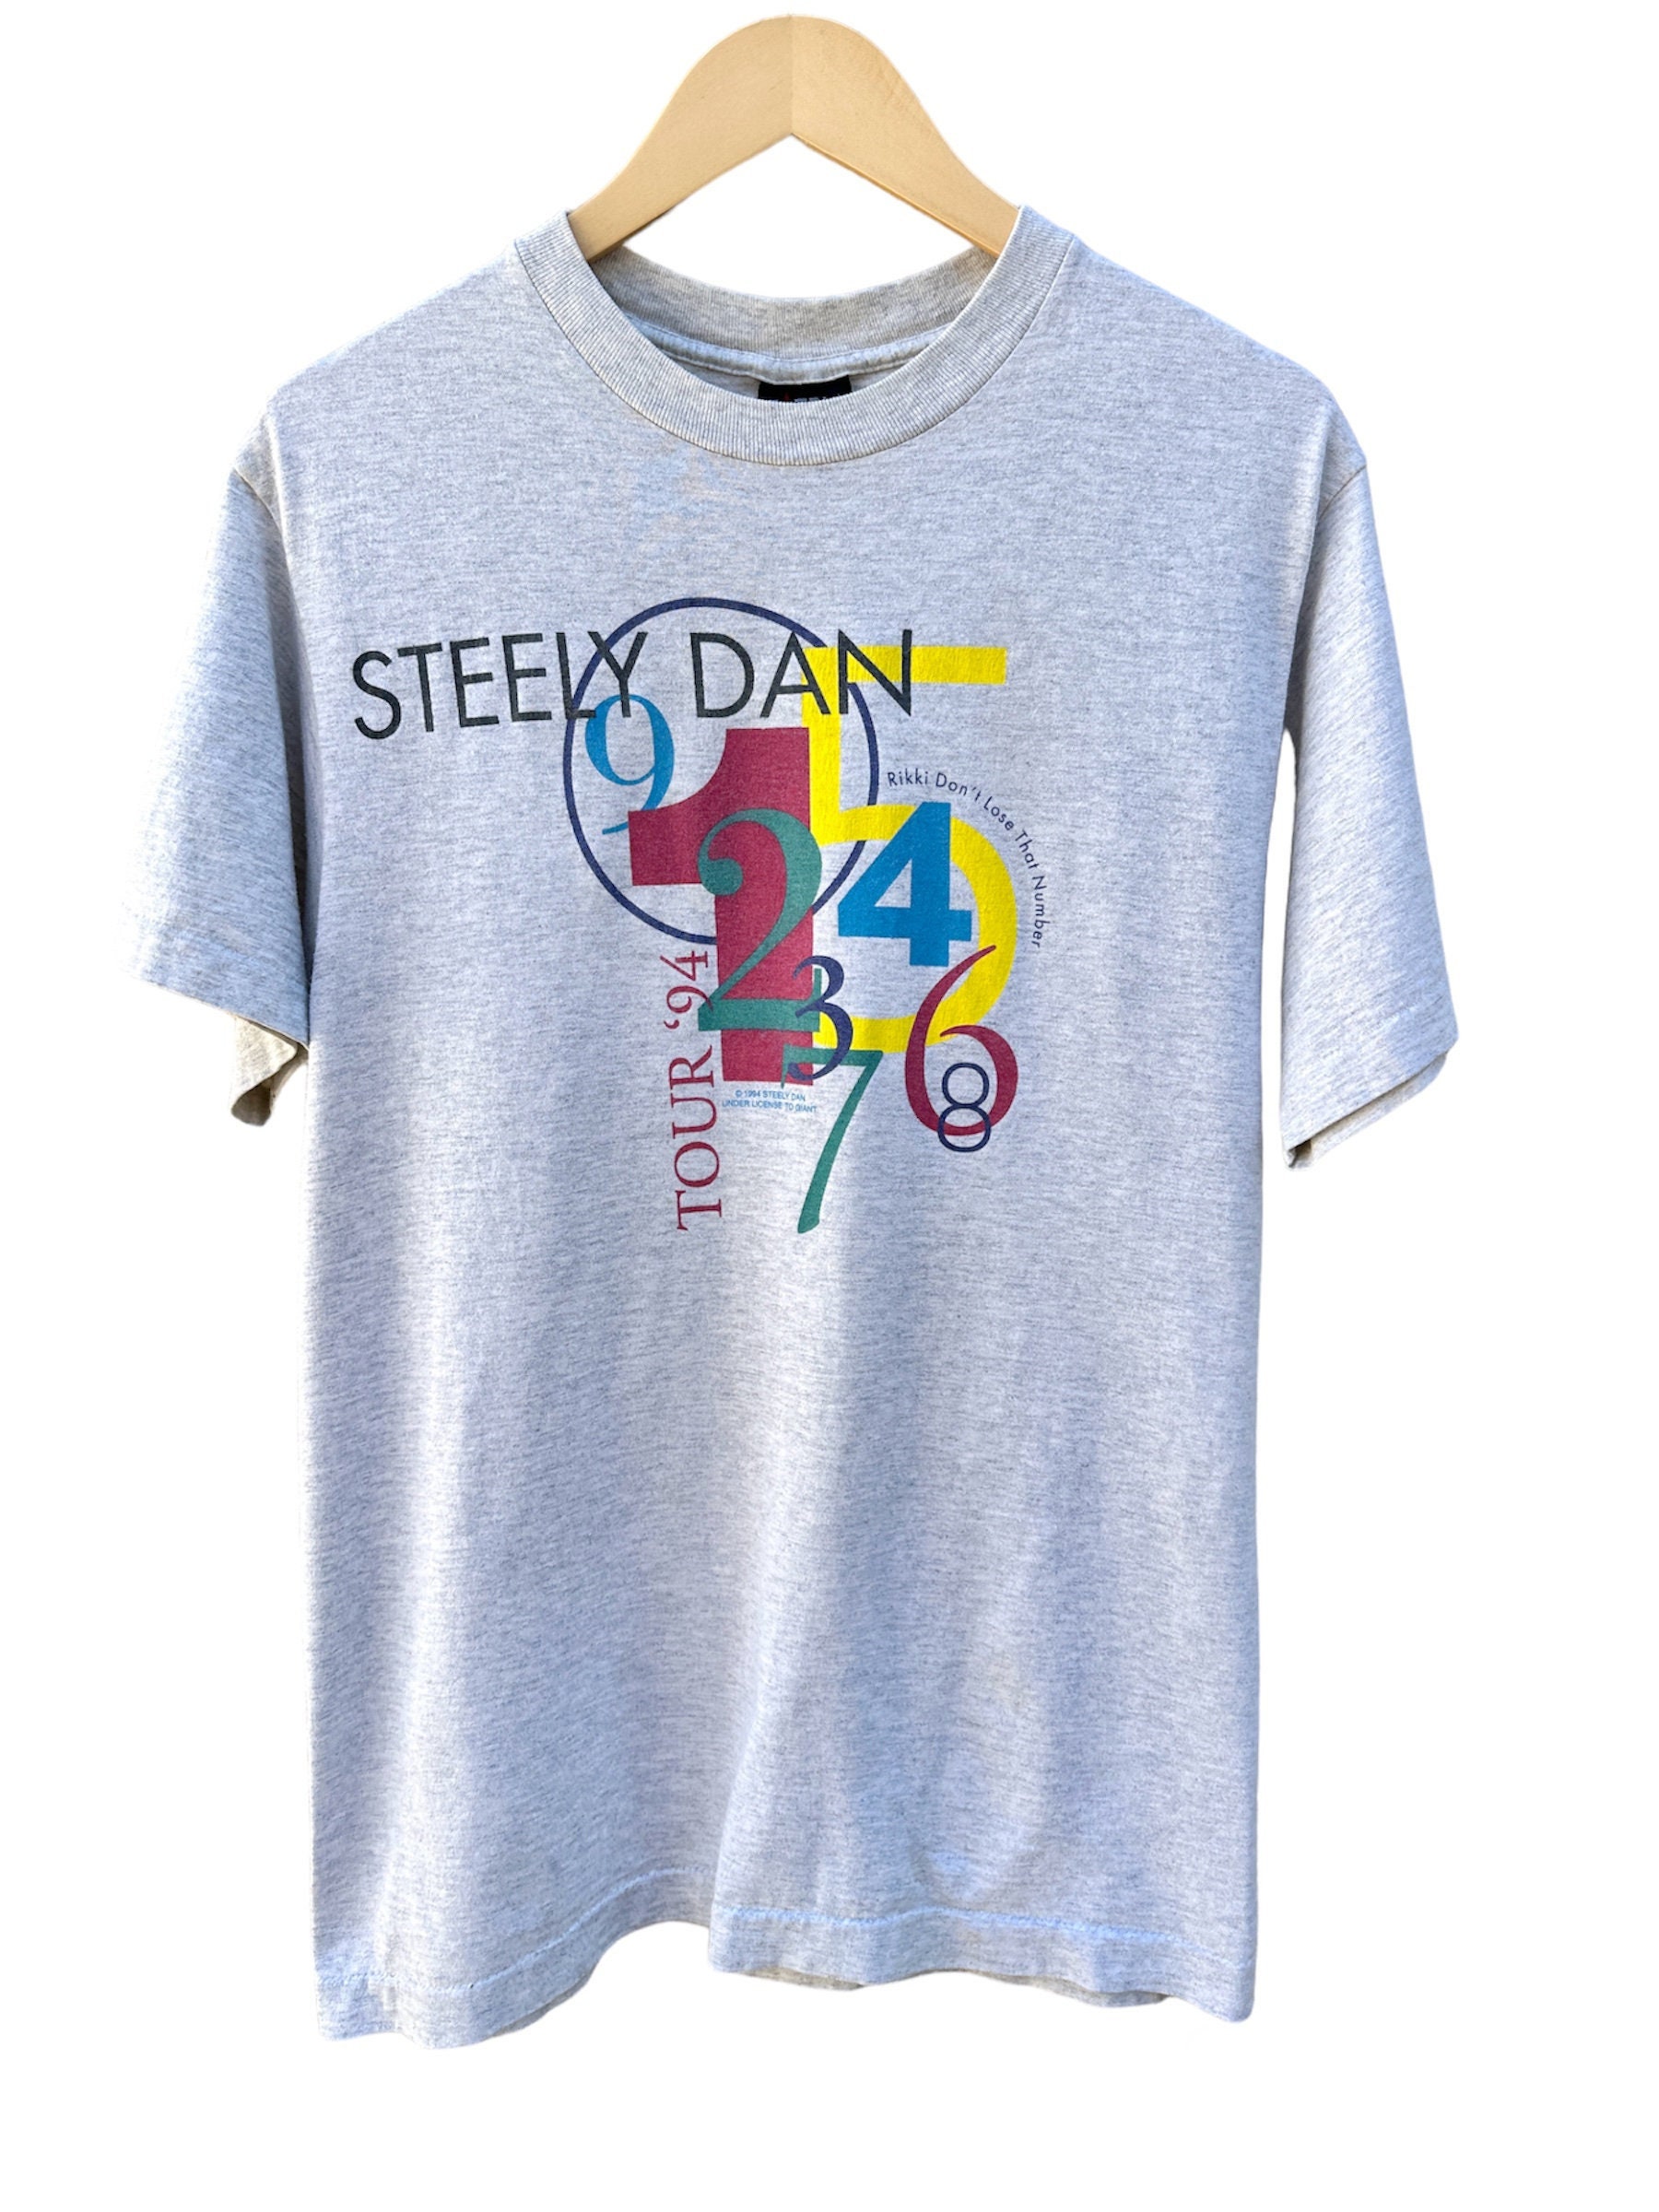 Vintage 1994 Steely Dan Double Sided Tour T-shirt